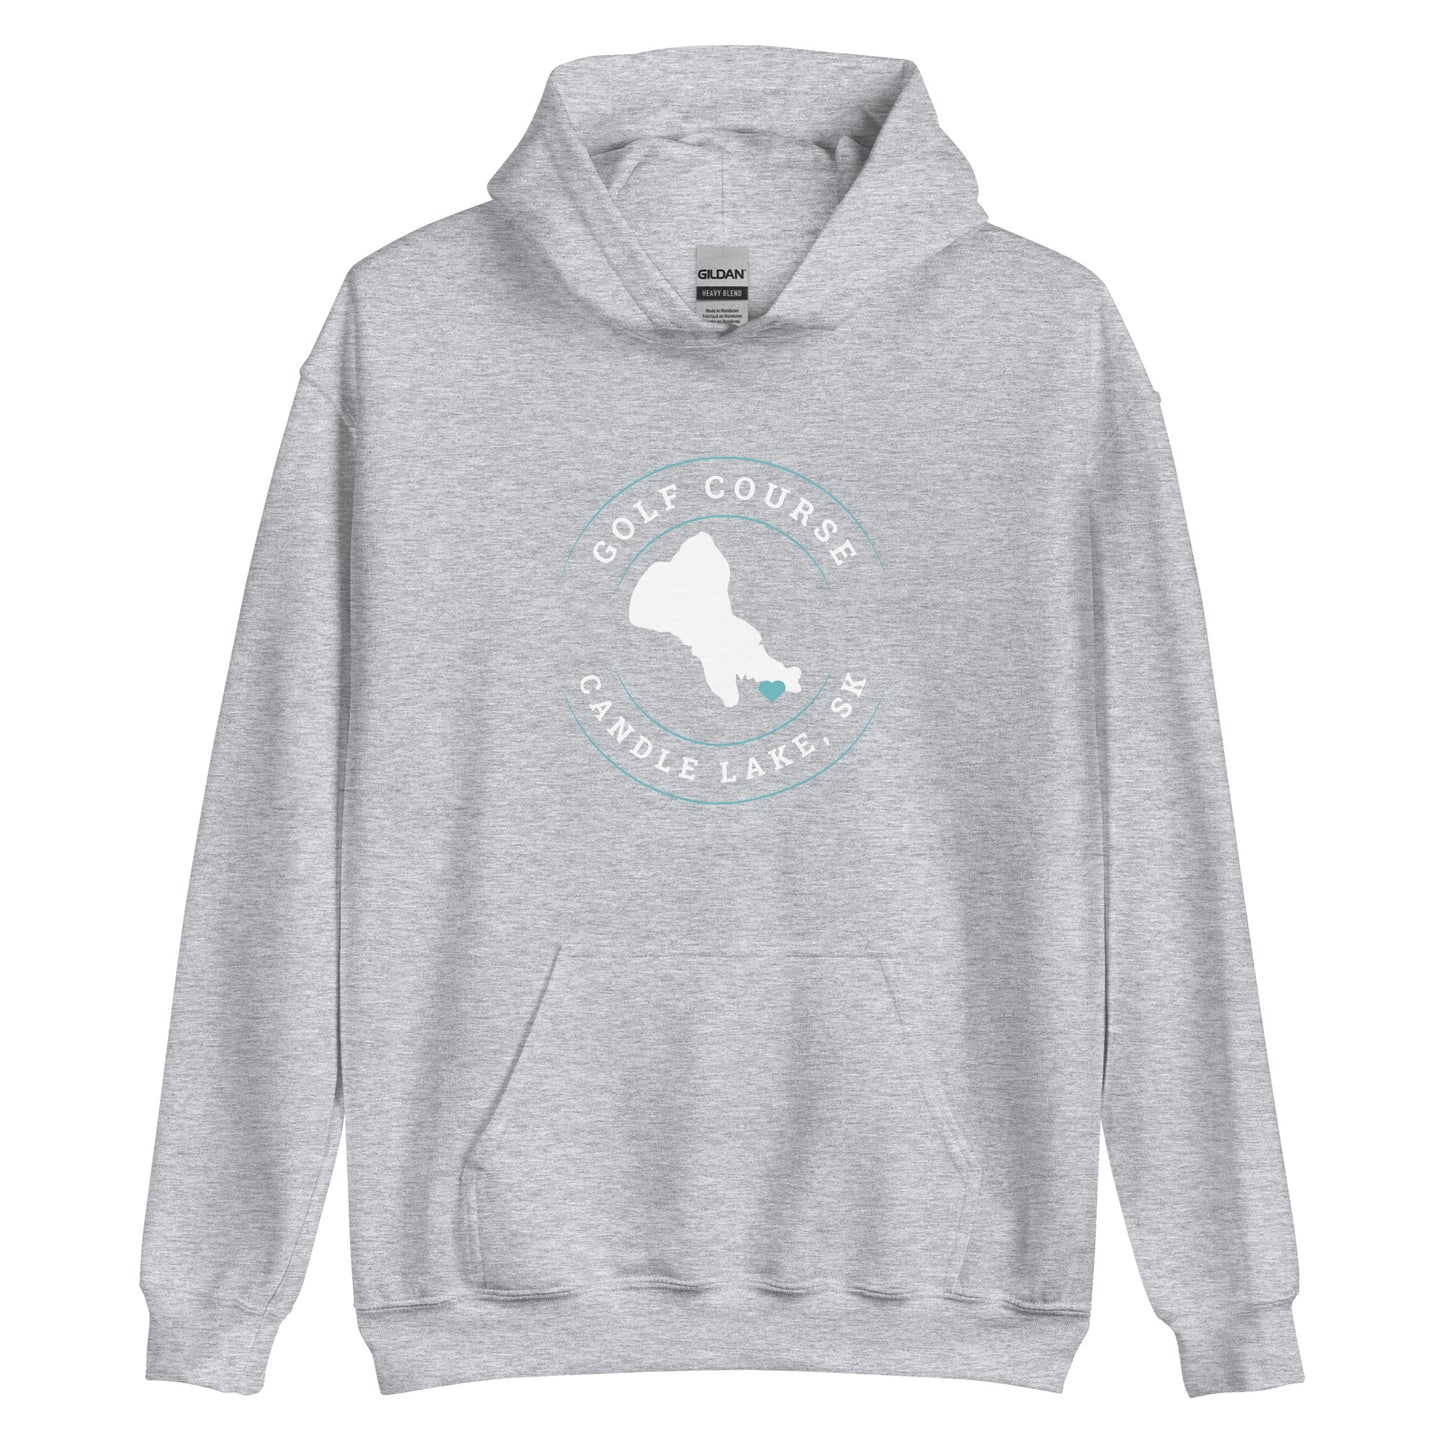 Candle Lake, SK - Unisex Hoodie - Golf Course